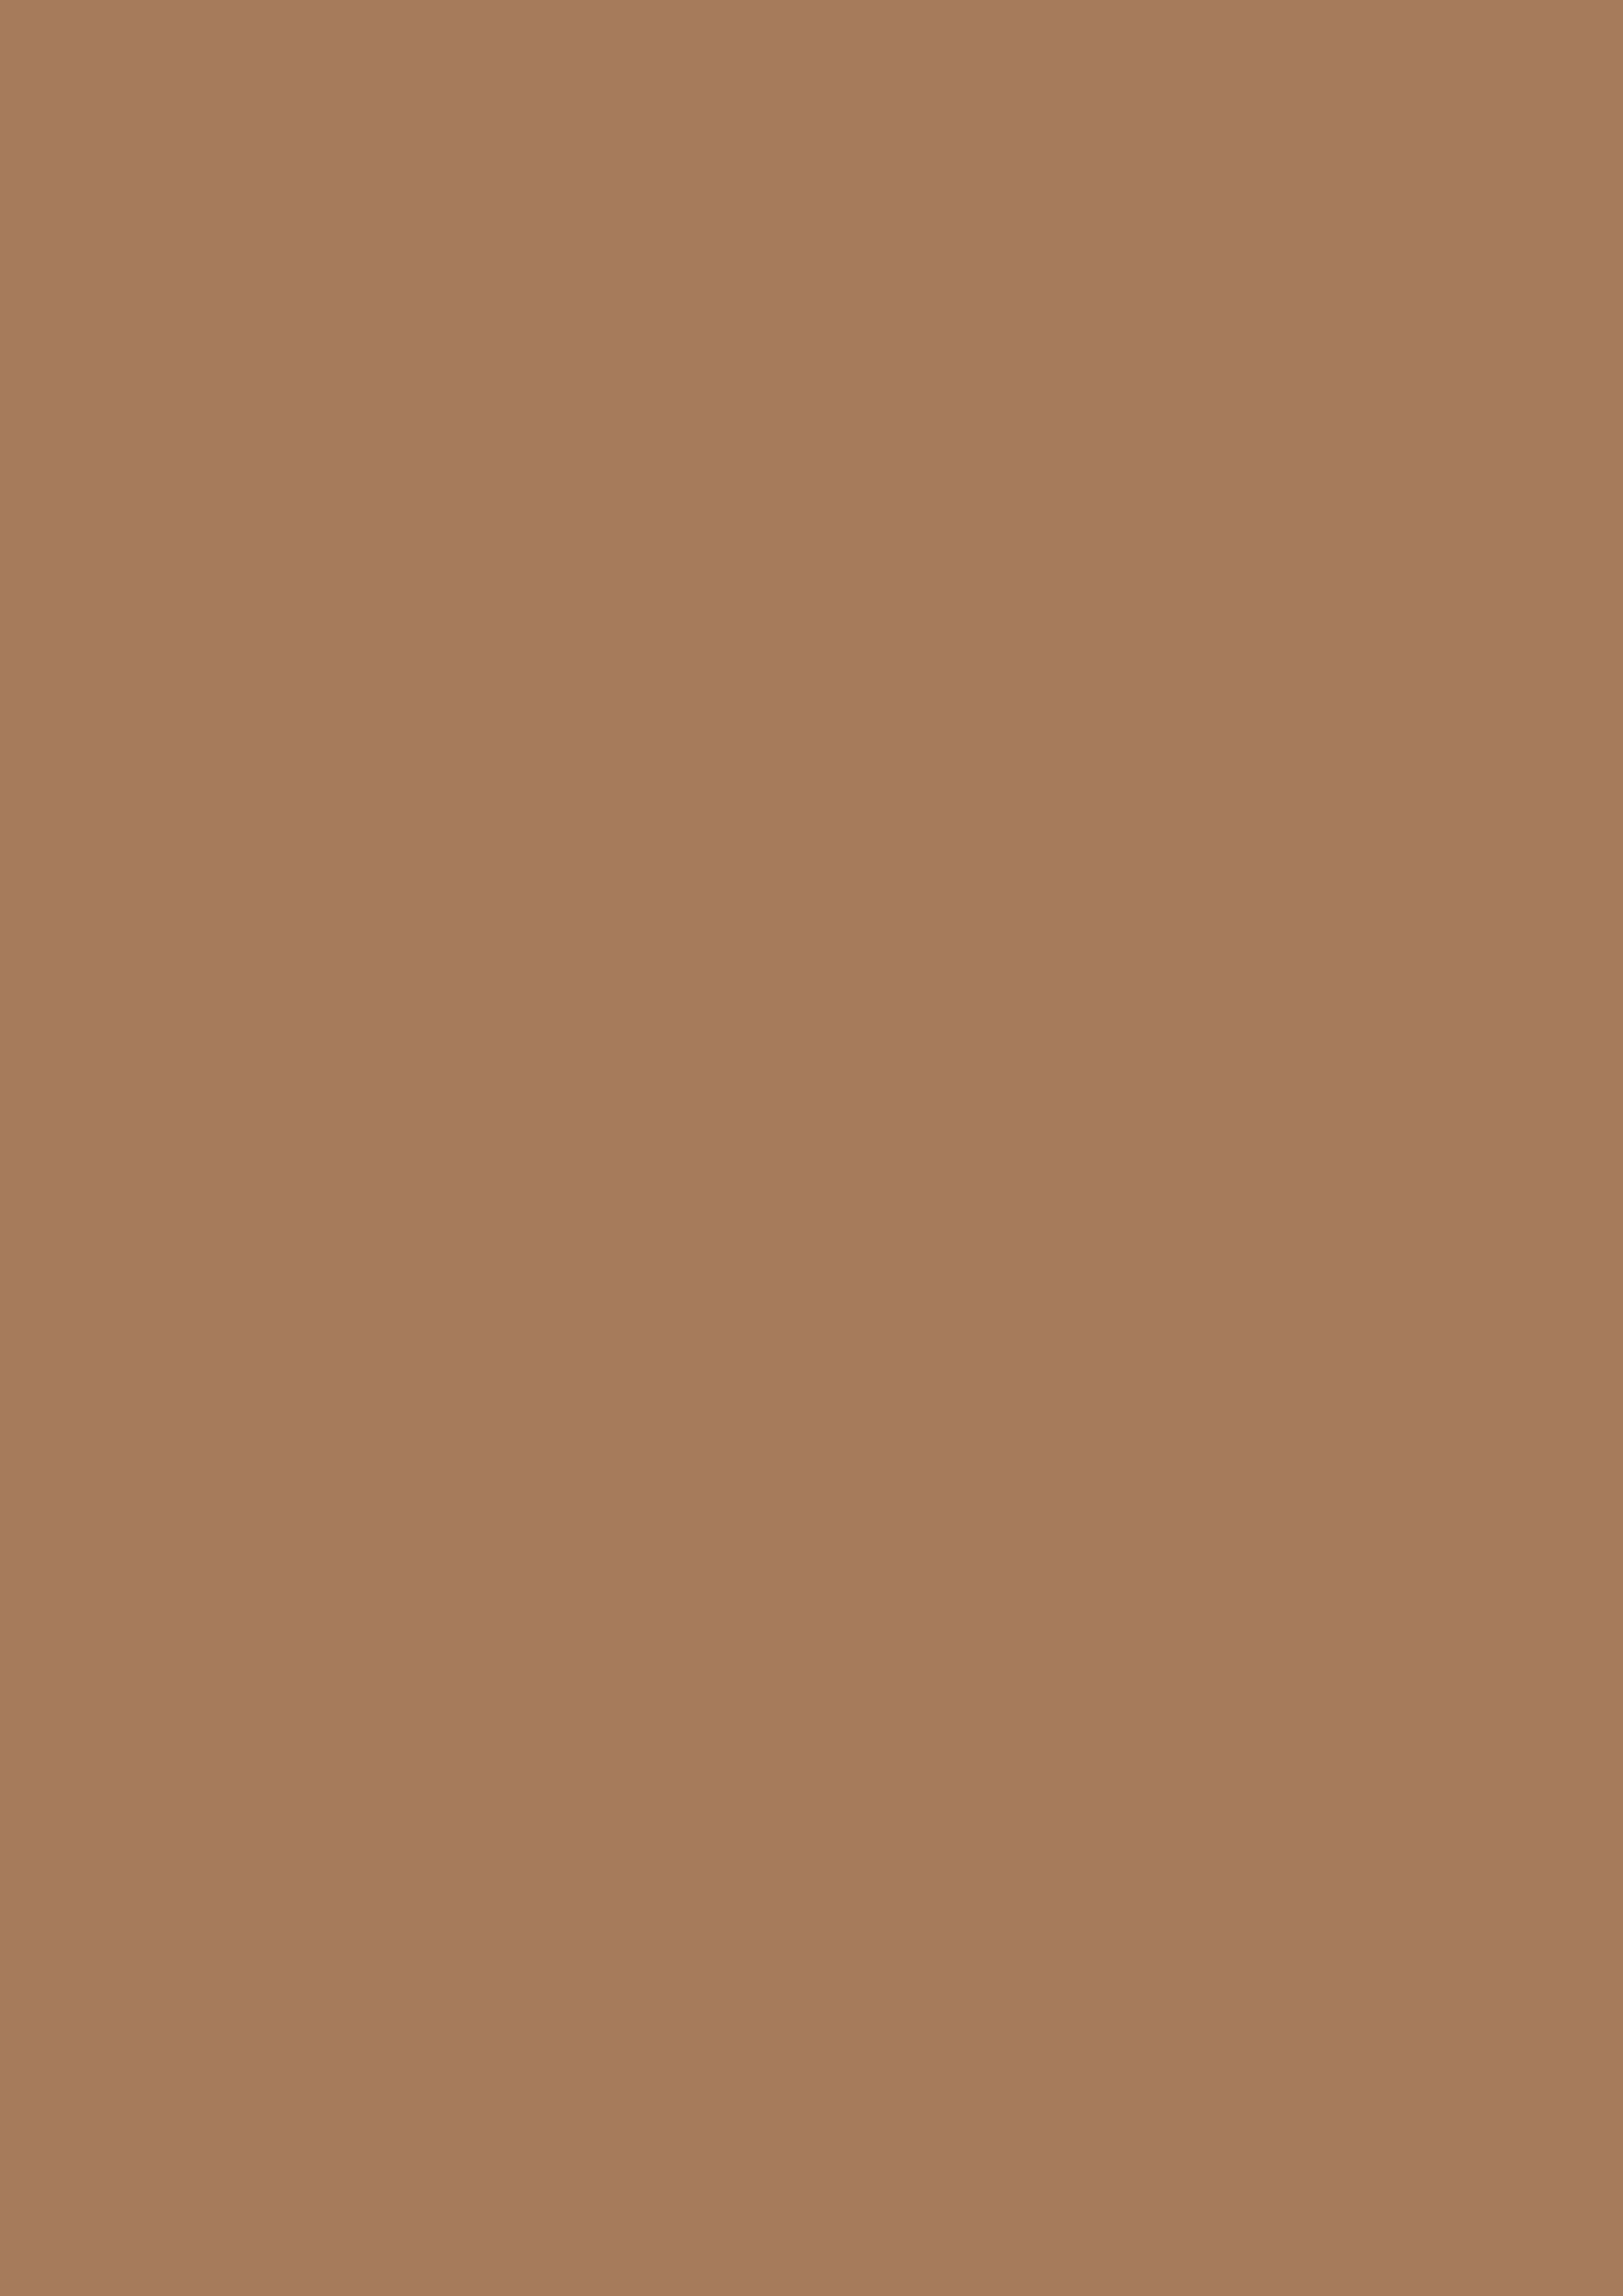 2480x3508 French Beige Solid Color Background